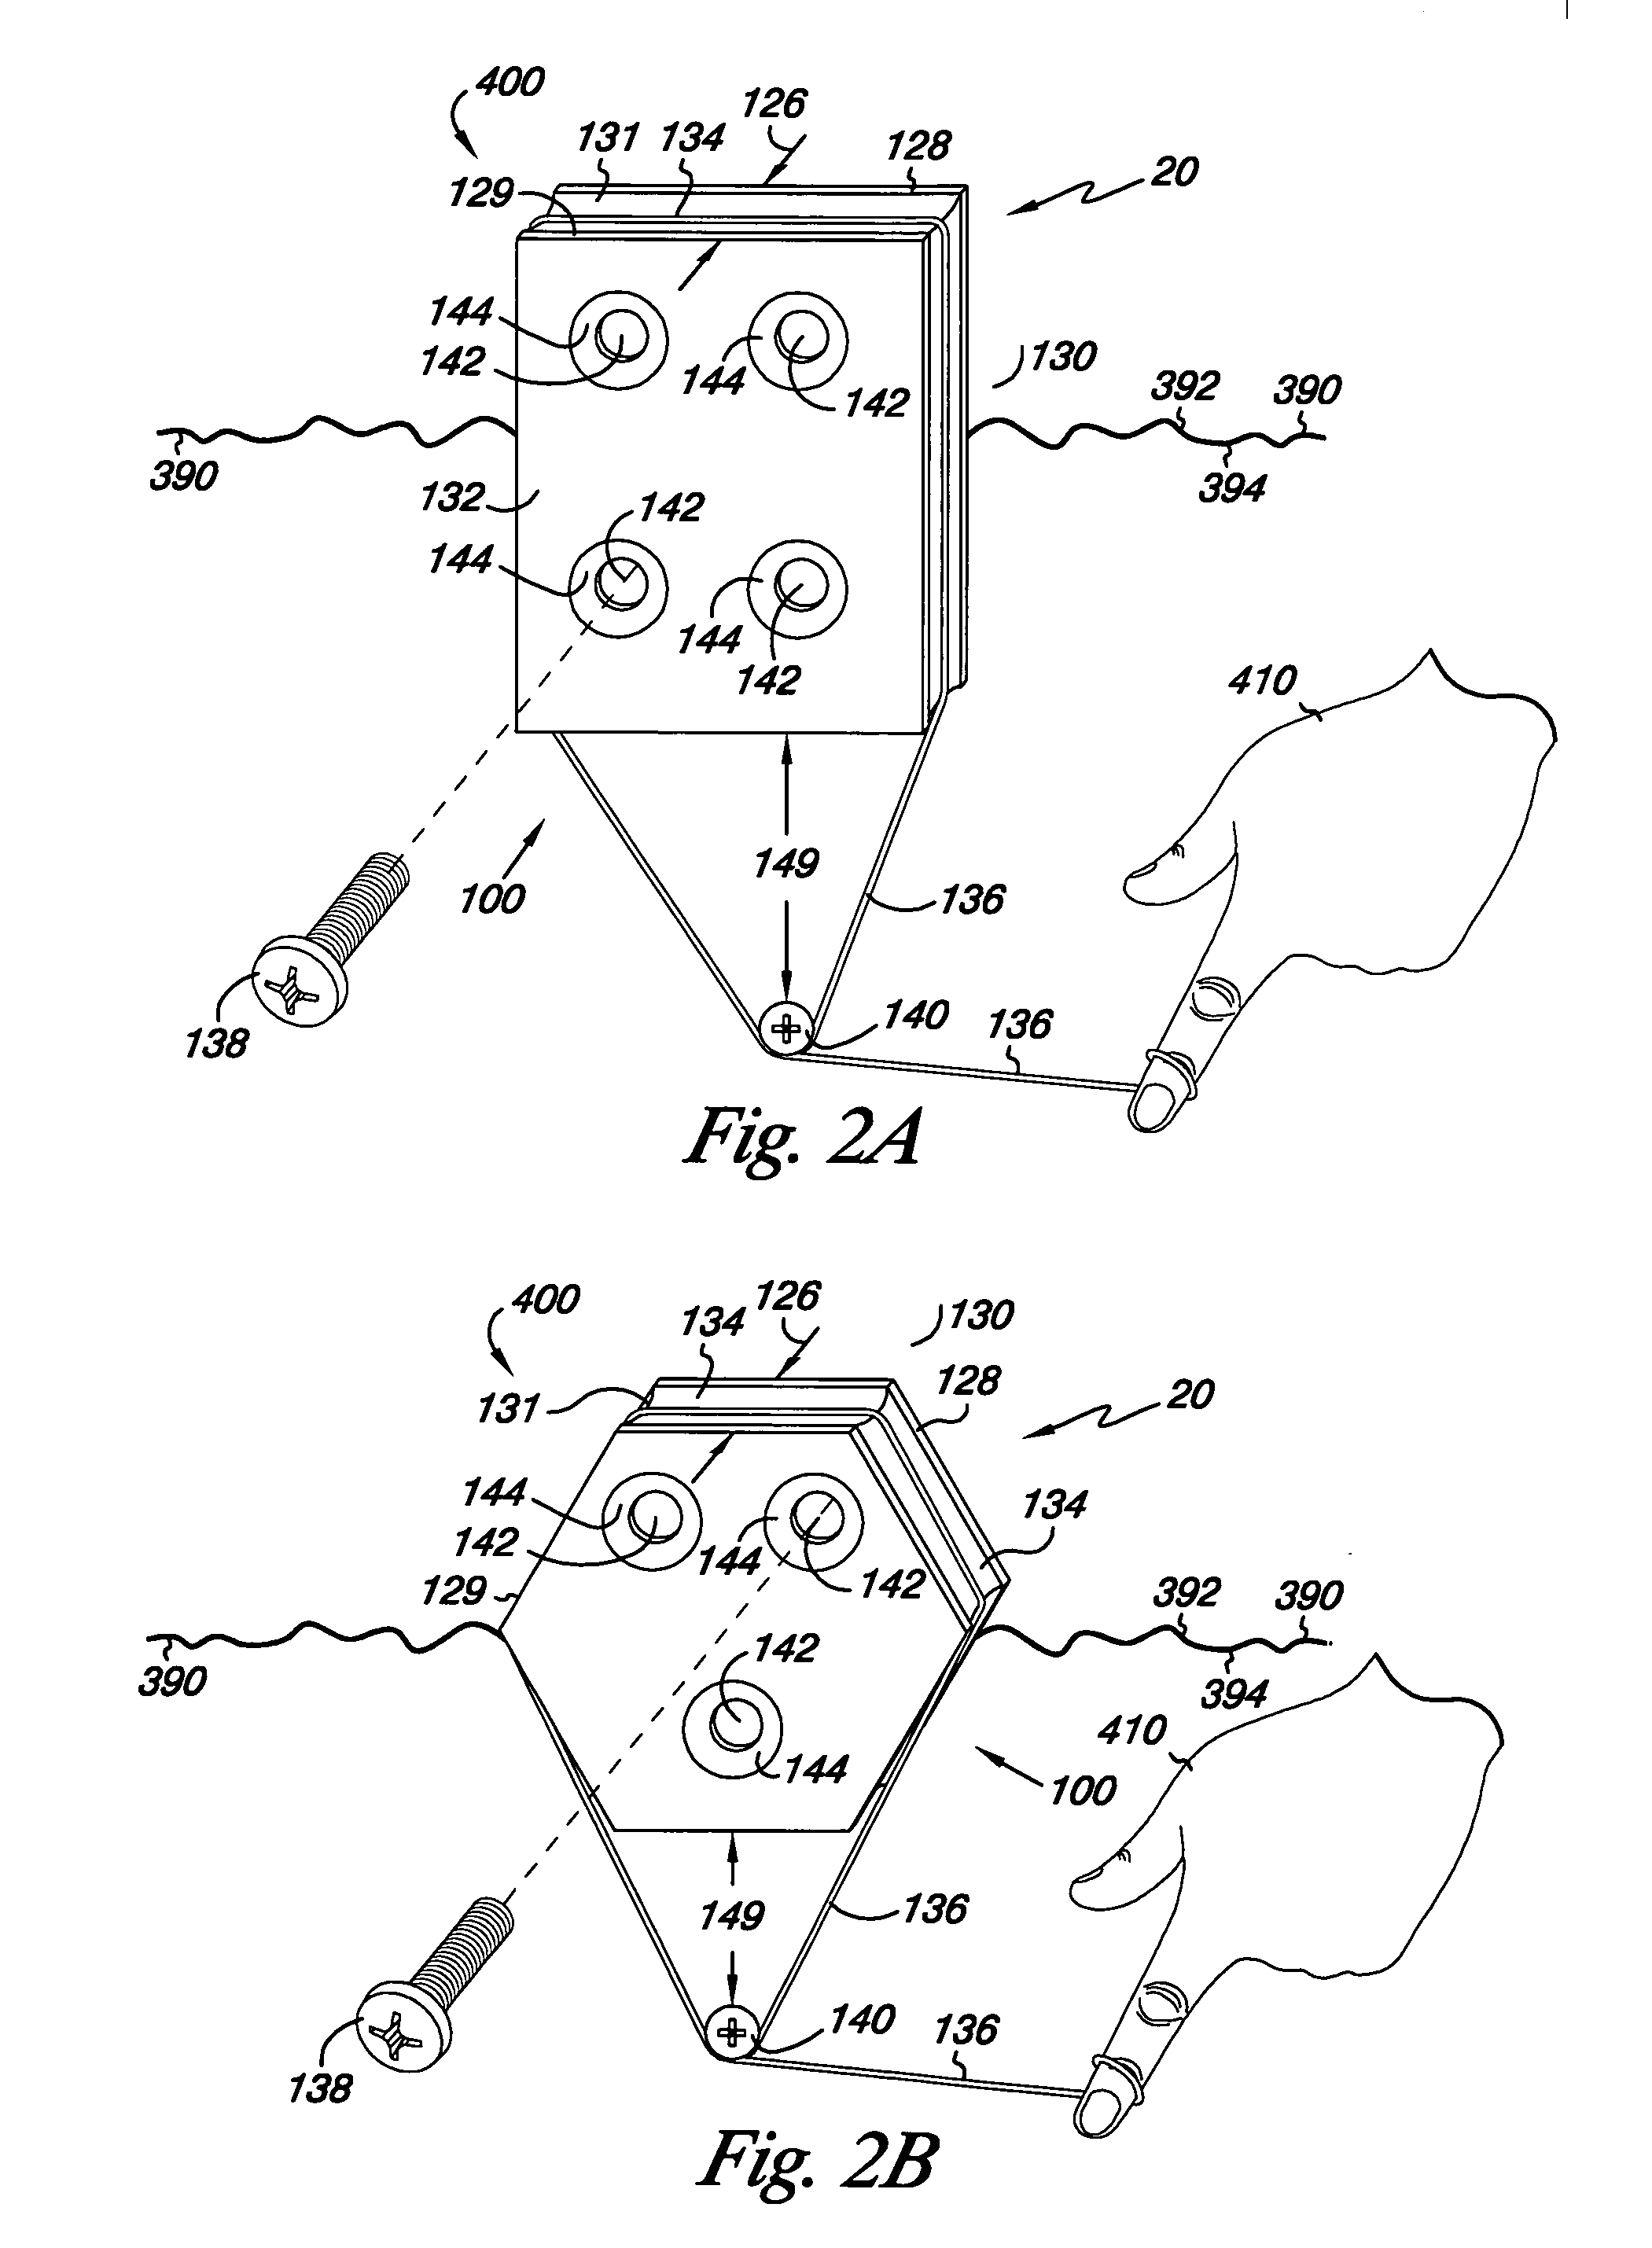 Apparatus and methods for bone fracture reduction and fixation